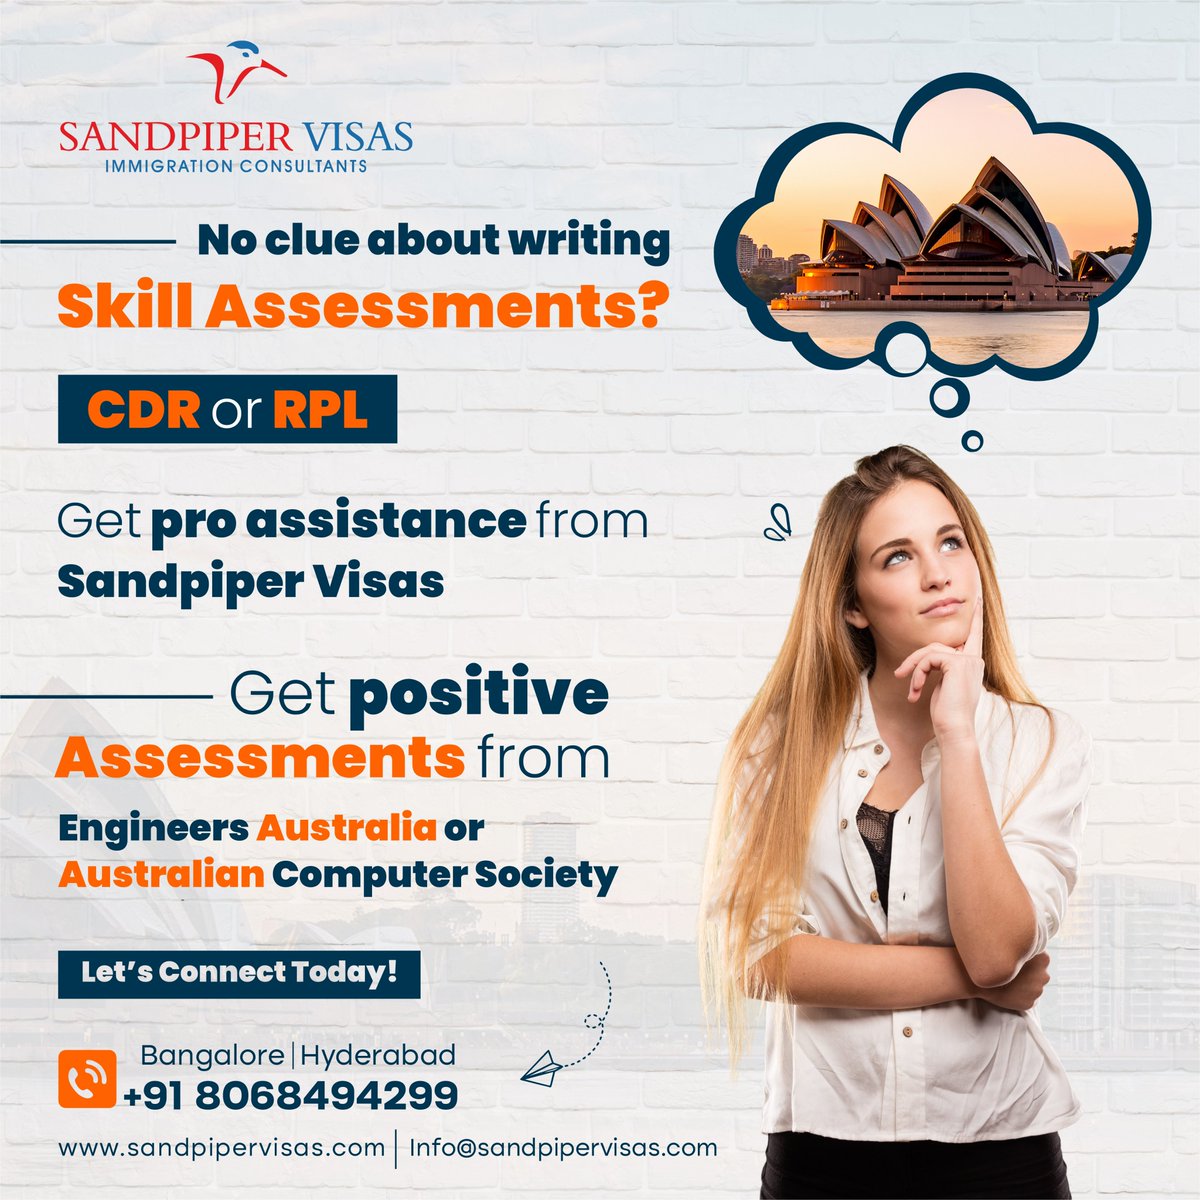 Get pro assistance from #SandpiperVisas for CDR or RPL & get positive assessments from Engineers Australia or #AustralianComputeSociety. Call Today
☎️8068494299
🌐sandpipervisas.com
#migrationskillassessment #australiangovernment #australia #engineersaustralia #writingskill